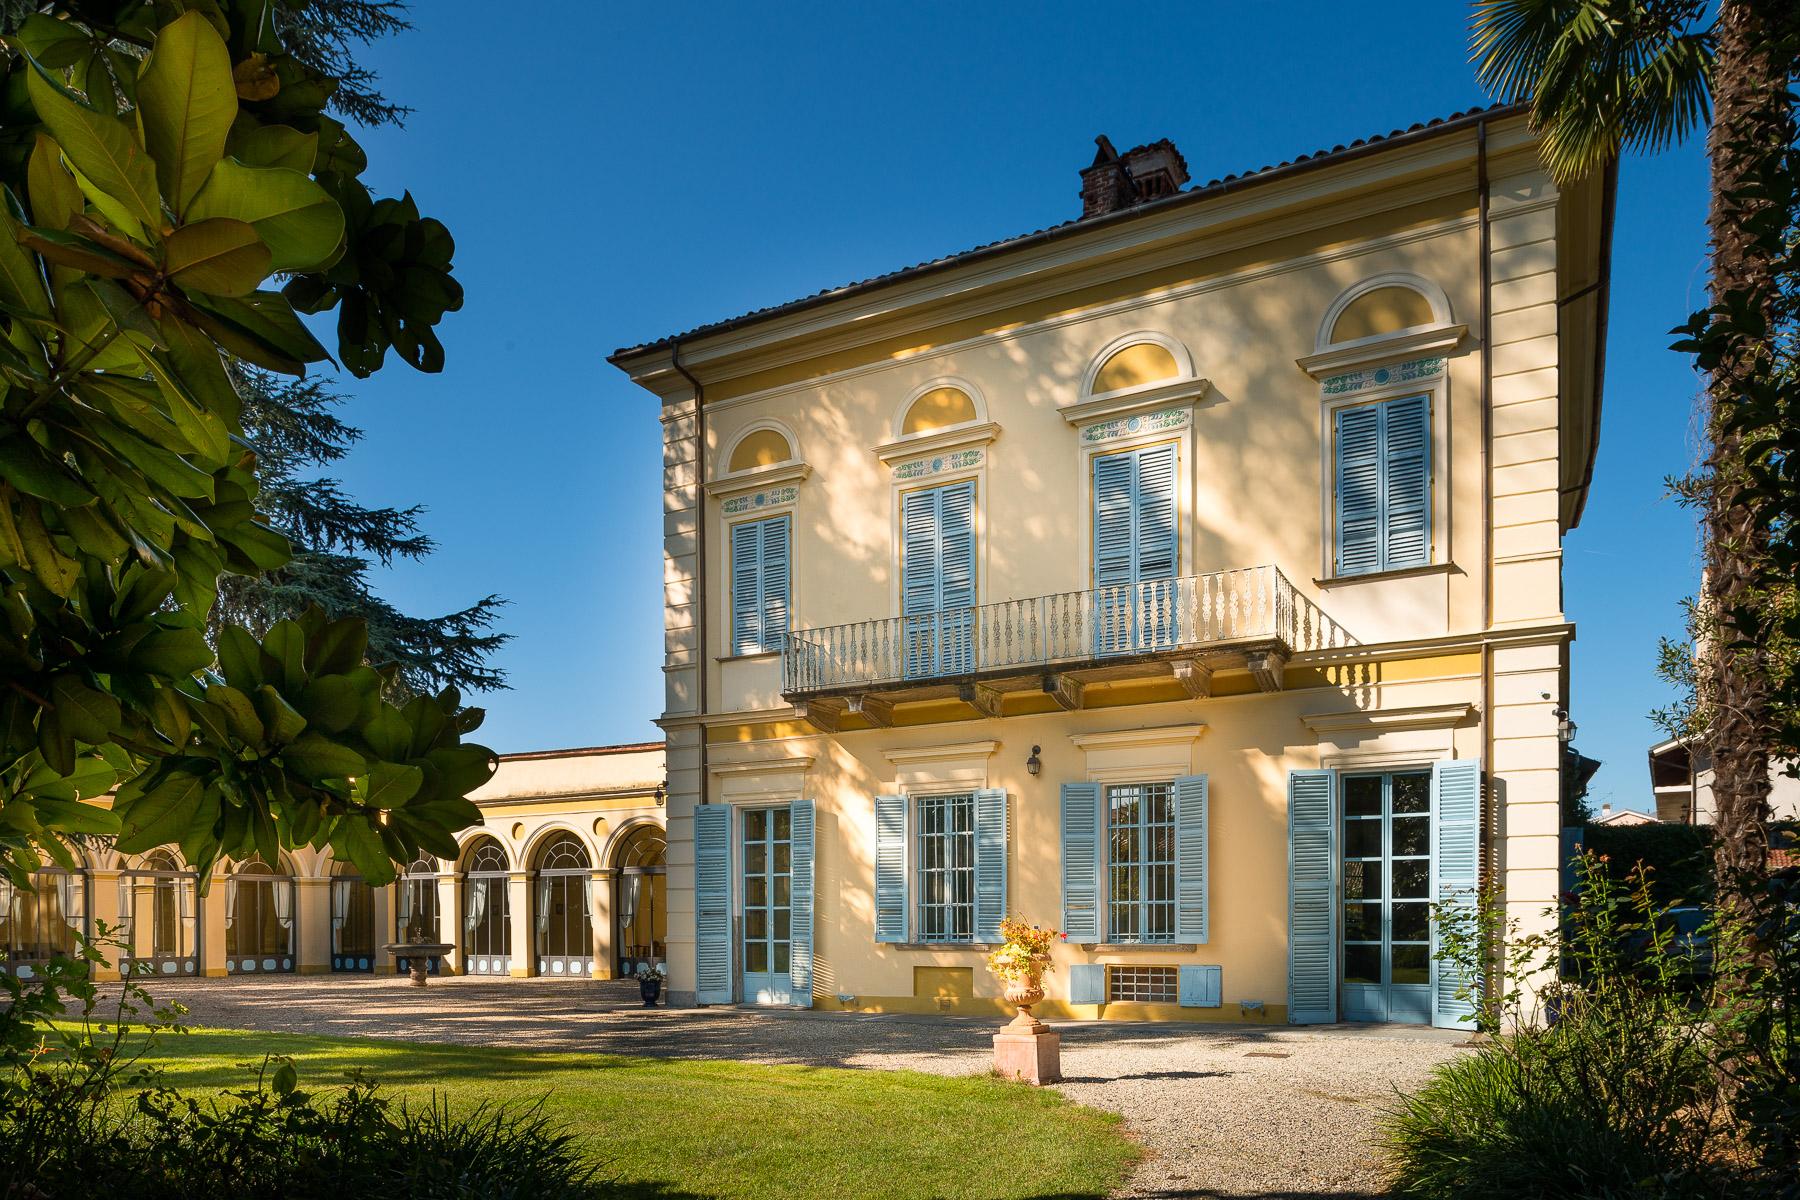 Elegant Villa in the Canavese countryside - 2